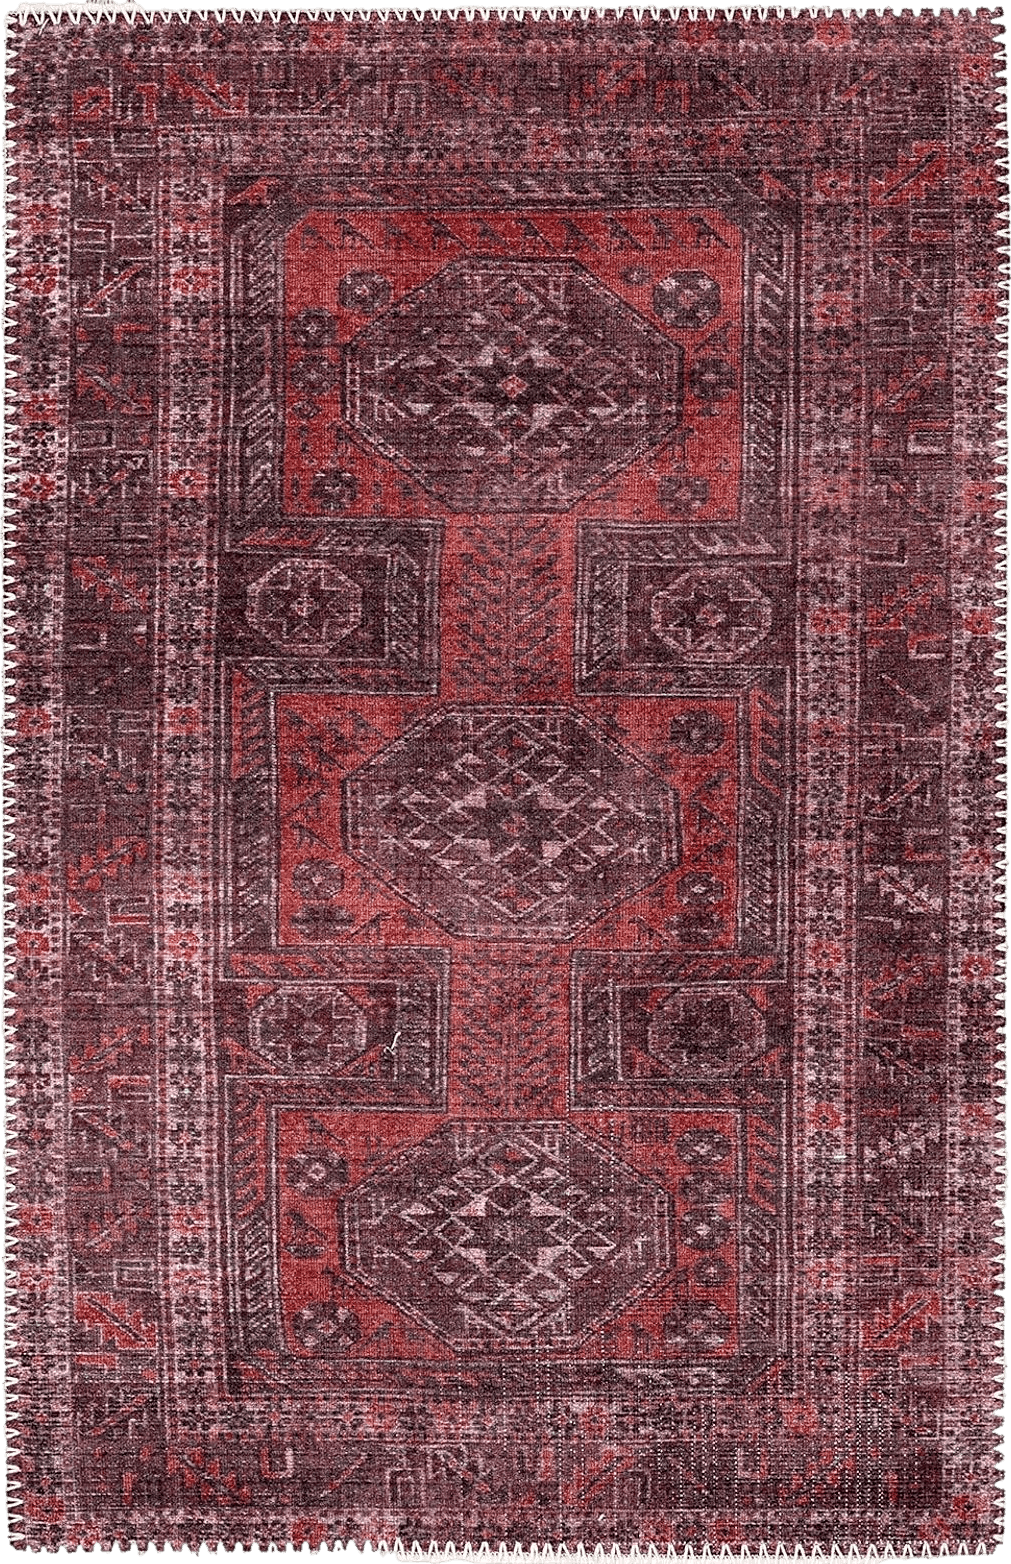 Turkish Adiva Rugs Machine Washable Area Rug with Non Slip Backing for Living Room, Bedroom, Bathroom, Kitchen, Printed Vintage Home Decor, Floor Decoration Carpet Mat (RED/Brown, 2' x 3')